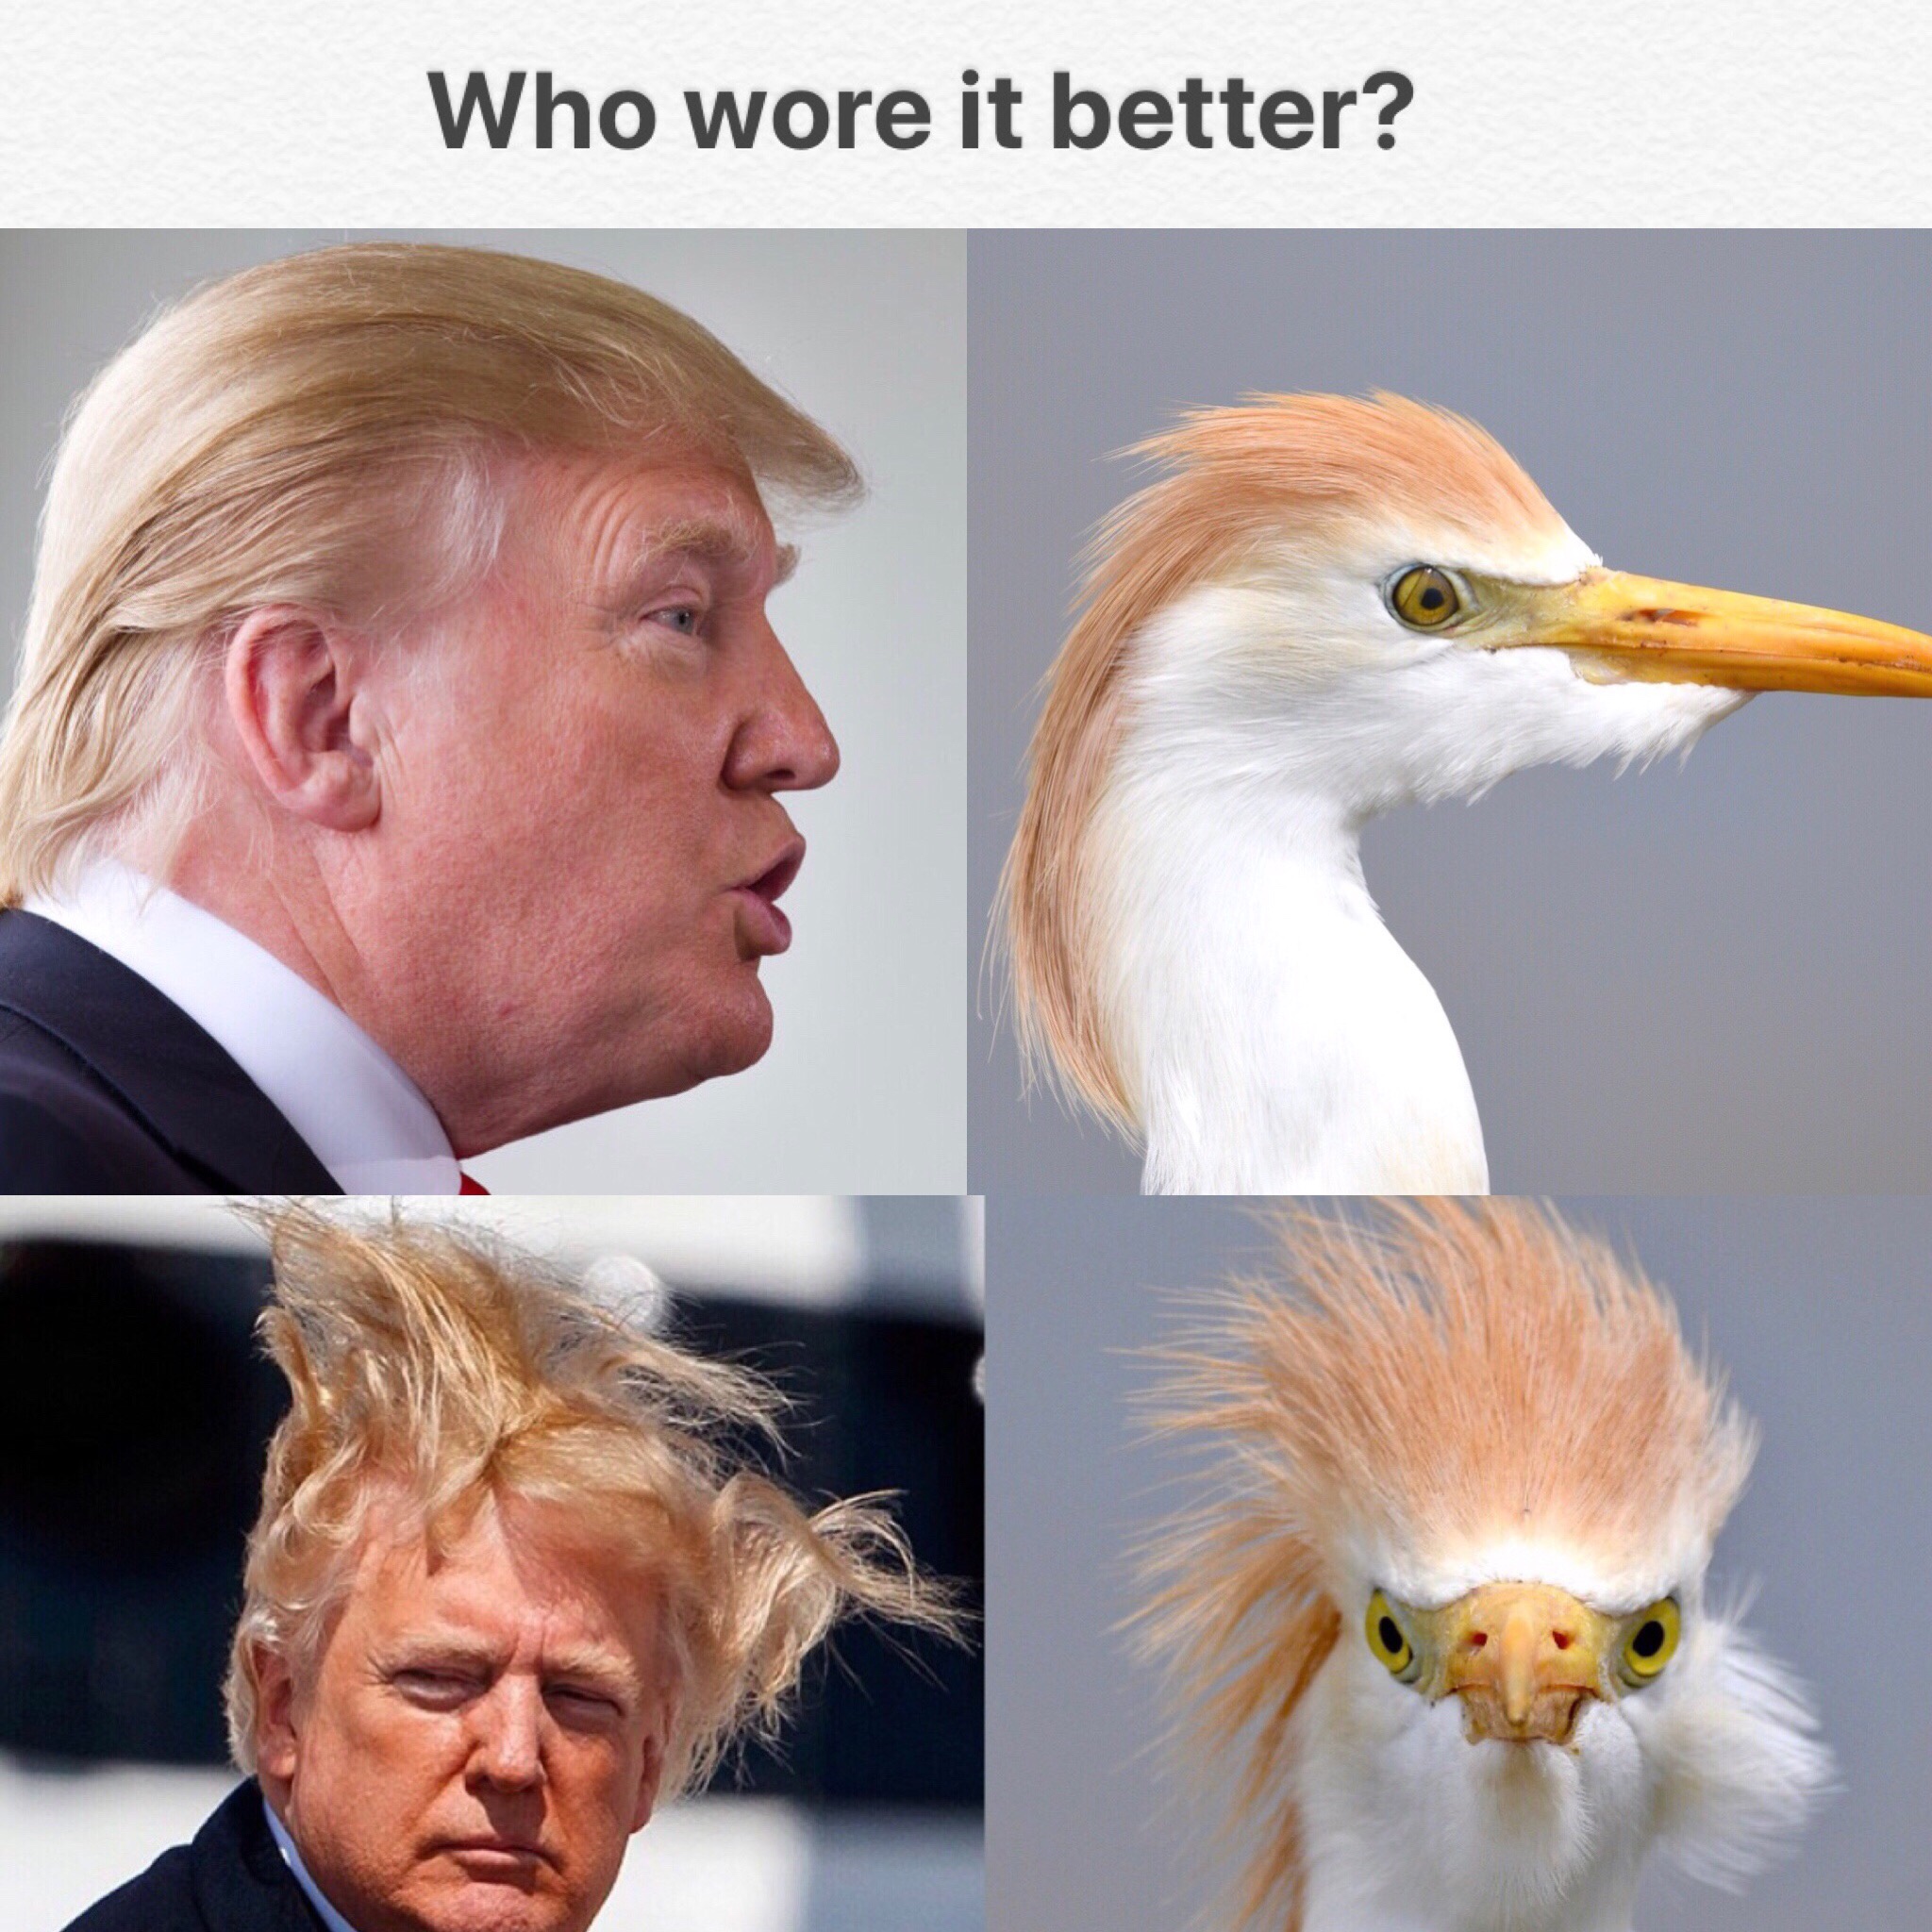 trump bad - Who wore it better?